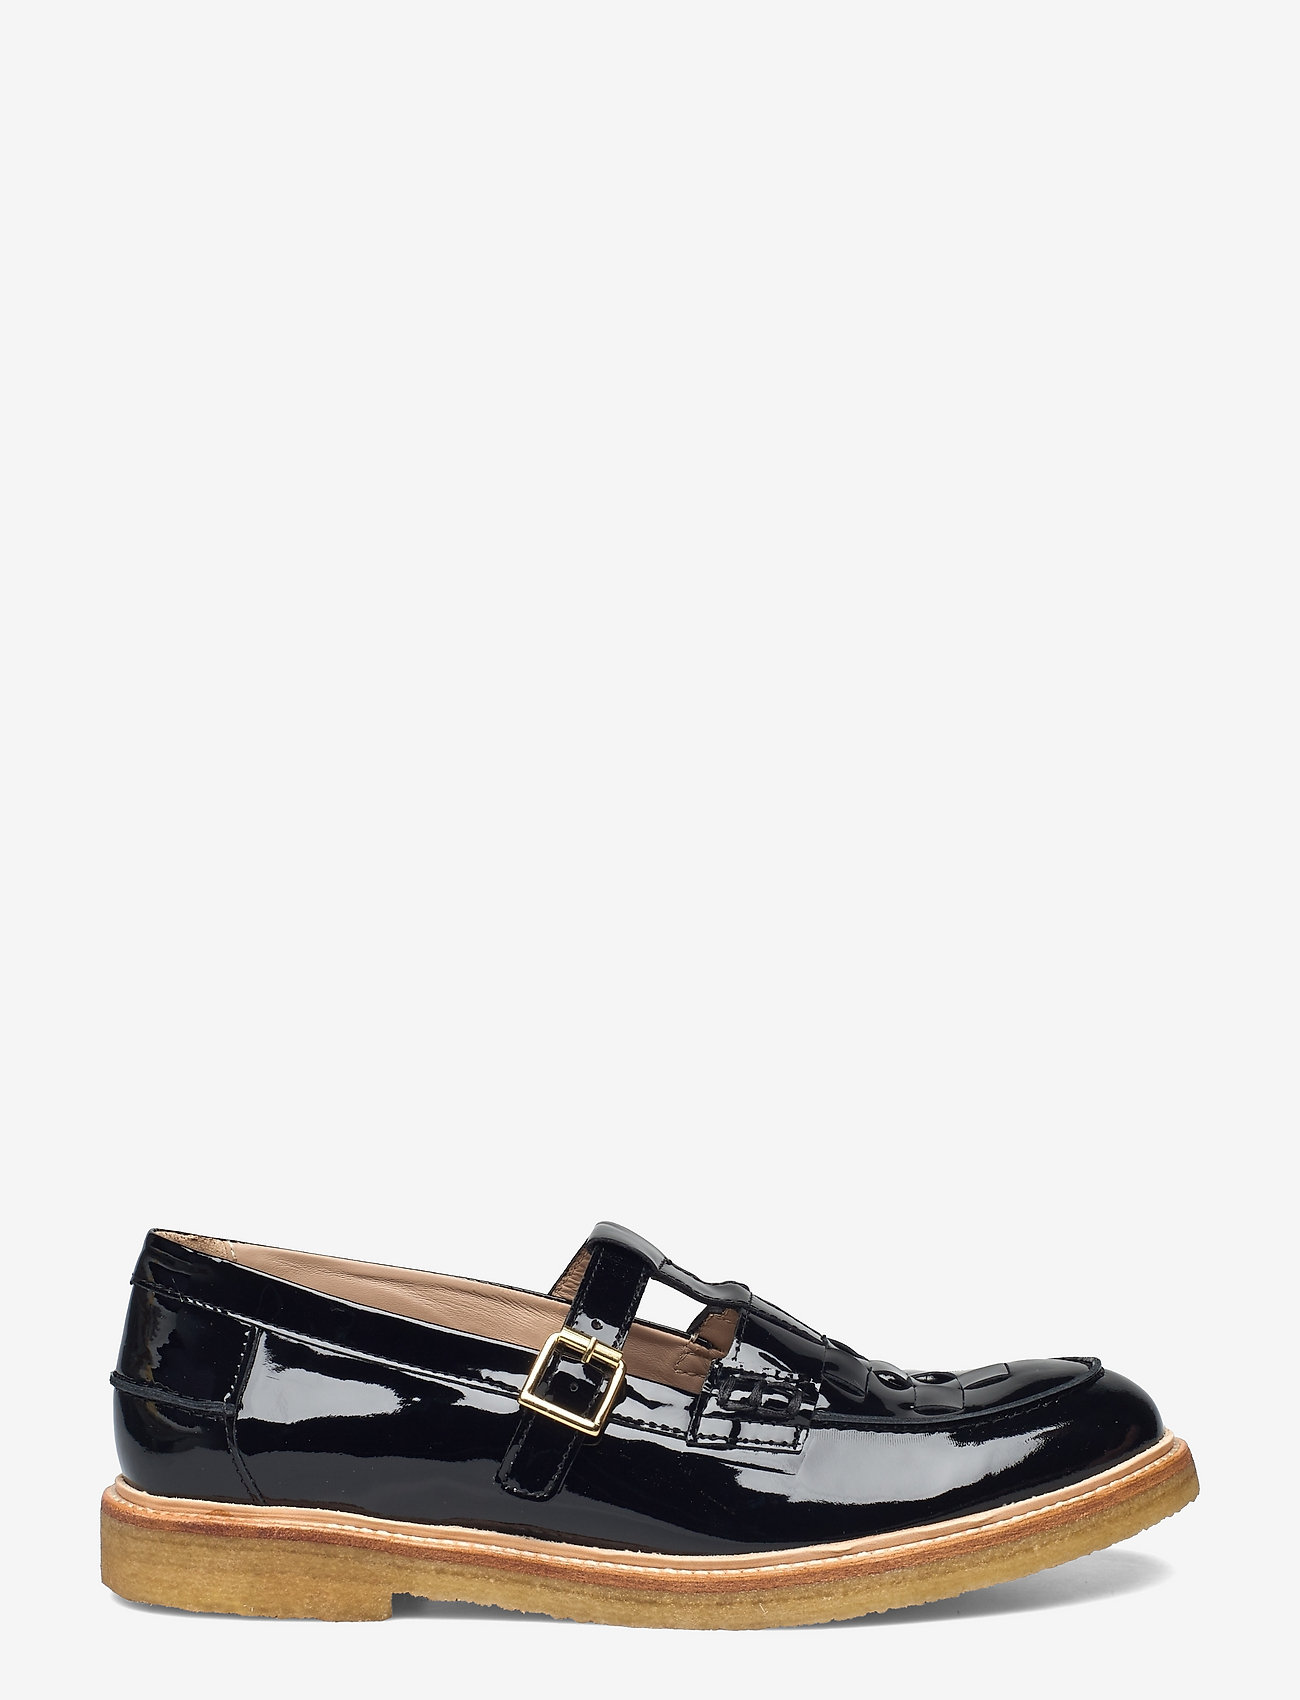 ANGULUS - Shoes - flat - loafers - 2320 black - 1